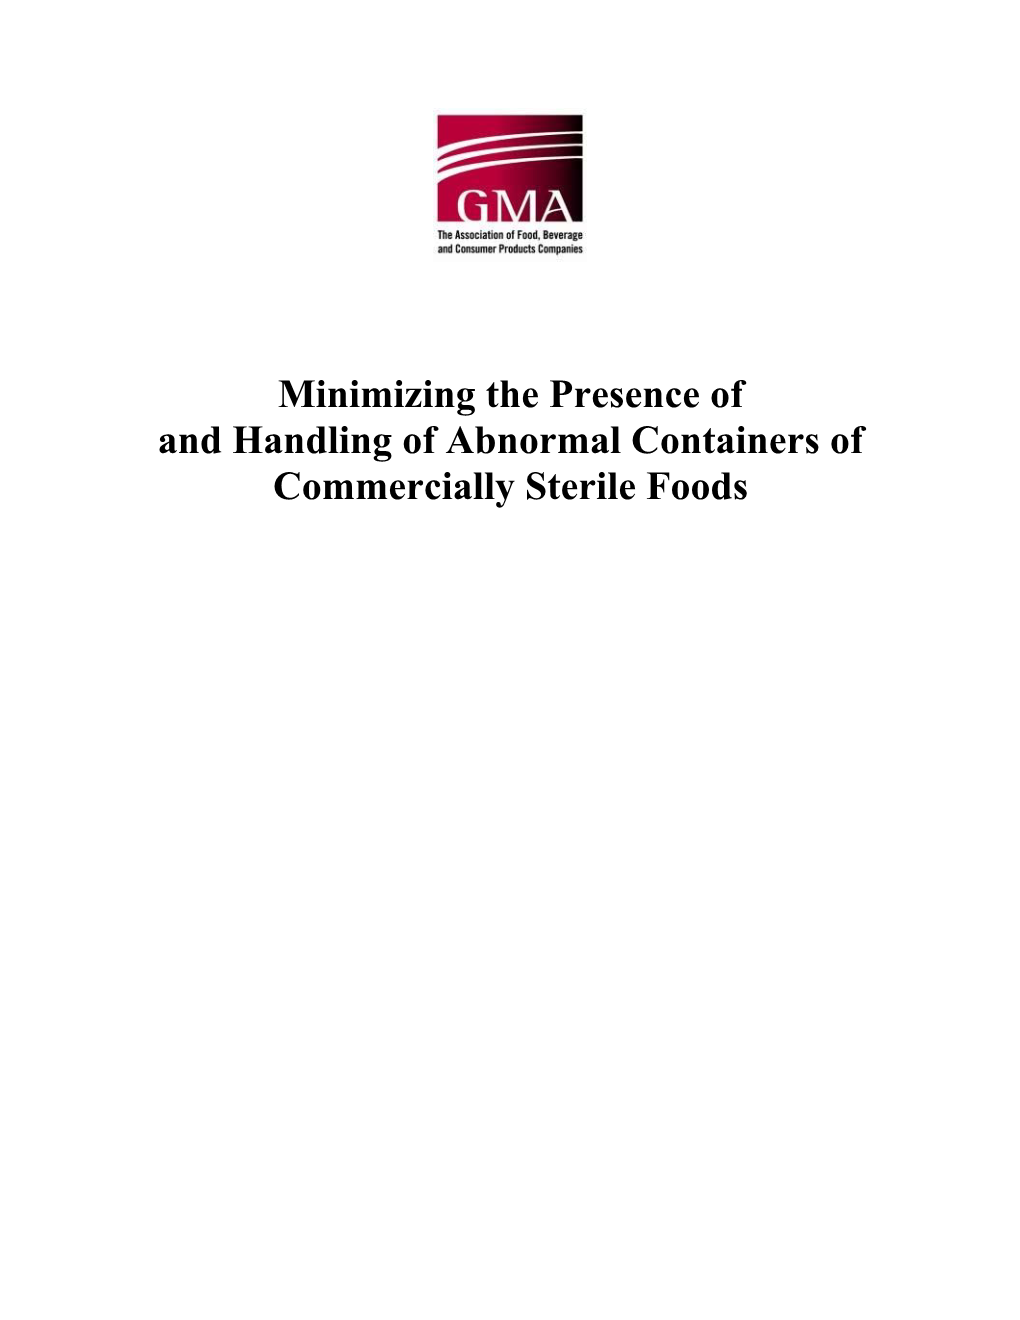 Minimizing the Presence of and Handling of Abnormal Containers of Commercially Sterile Foods